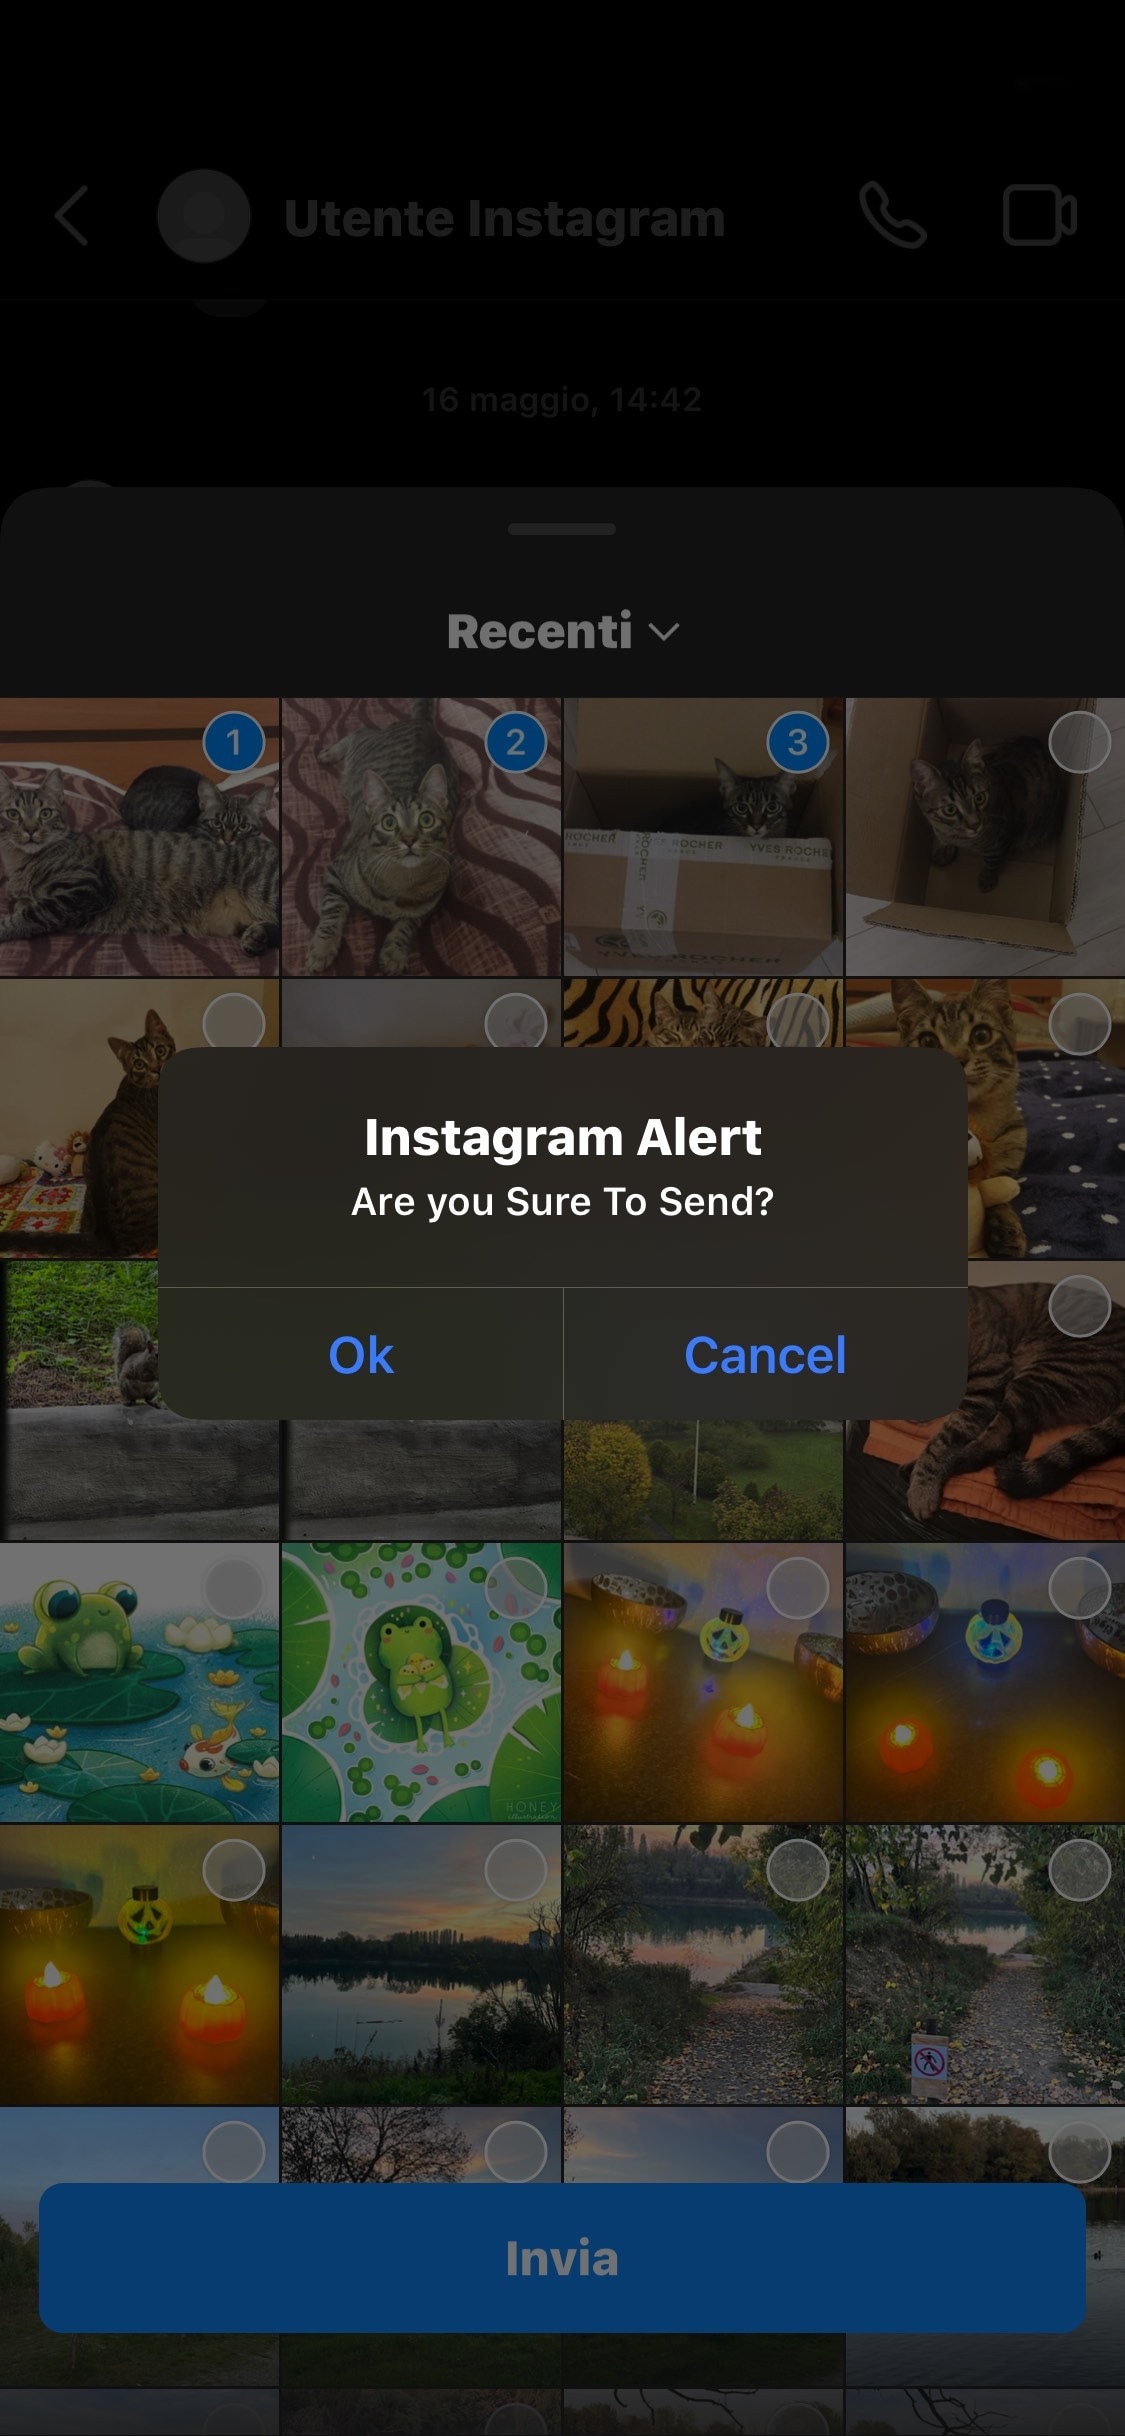 IGTidyMediaSend prevents accidental media uploads to Instagram by making the user confirm